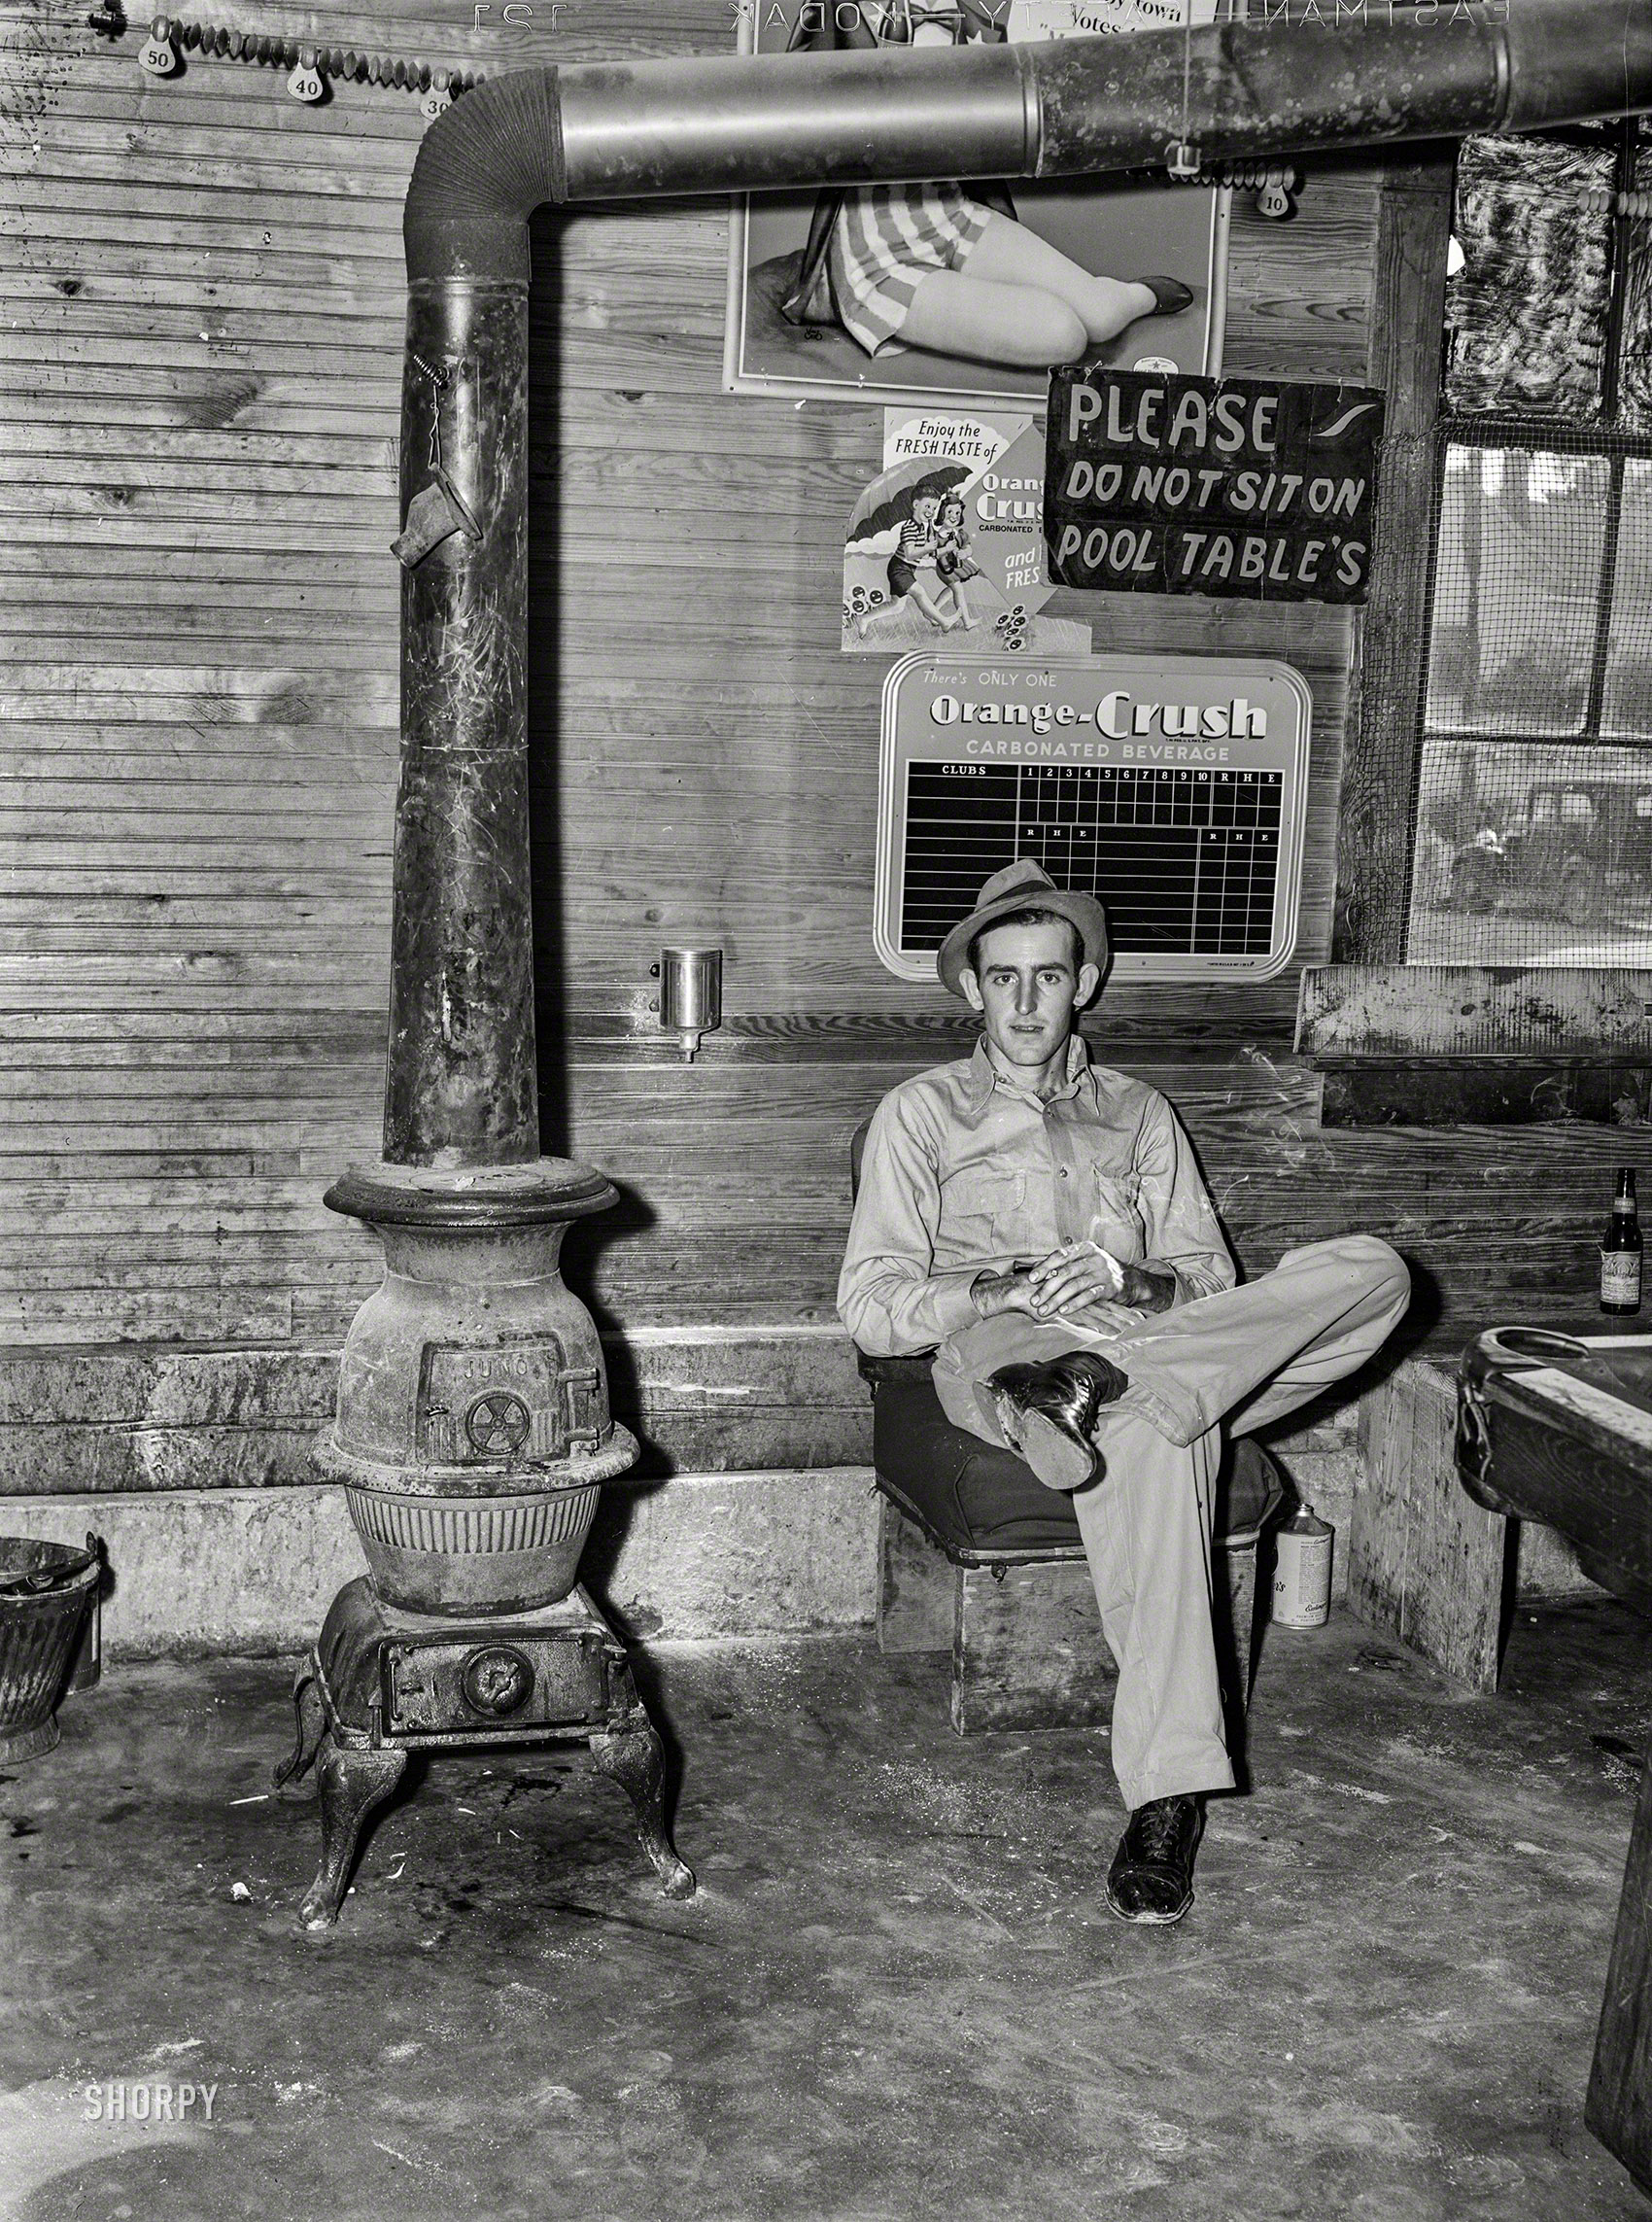 May 1940. "Interior of poolroom and general store. Stem, Granville County, North Carolina." Medium format negative by Jack Delano. View full size.